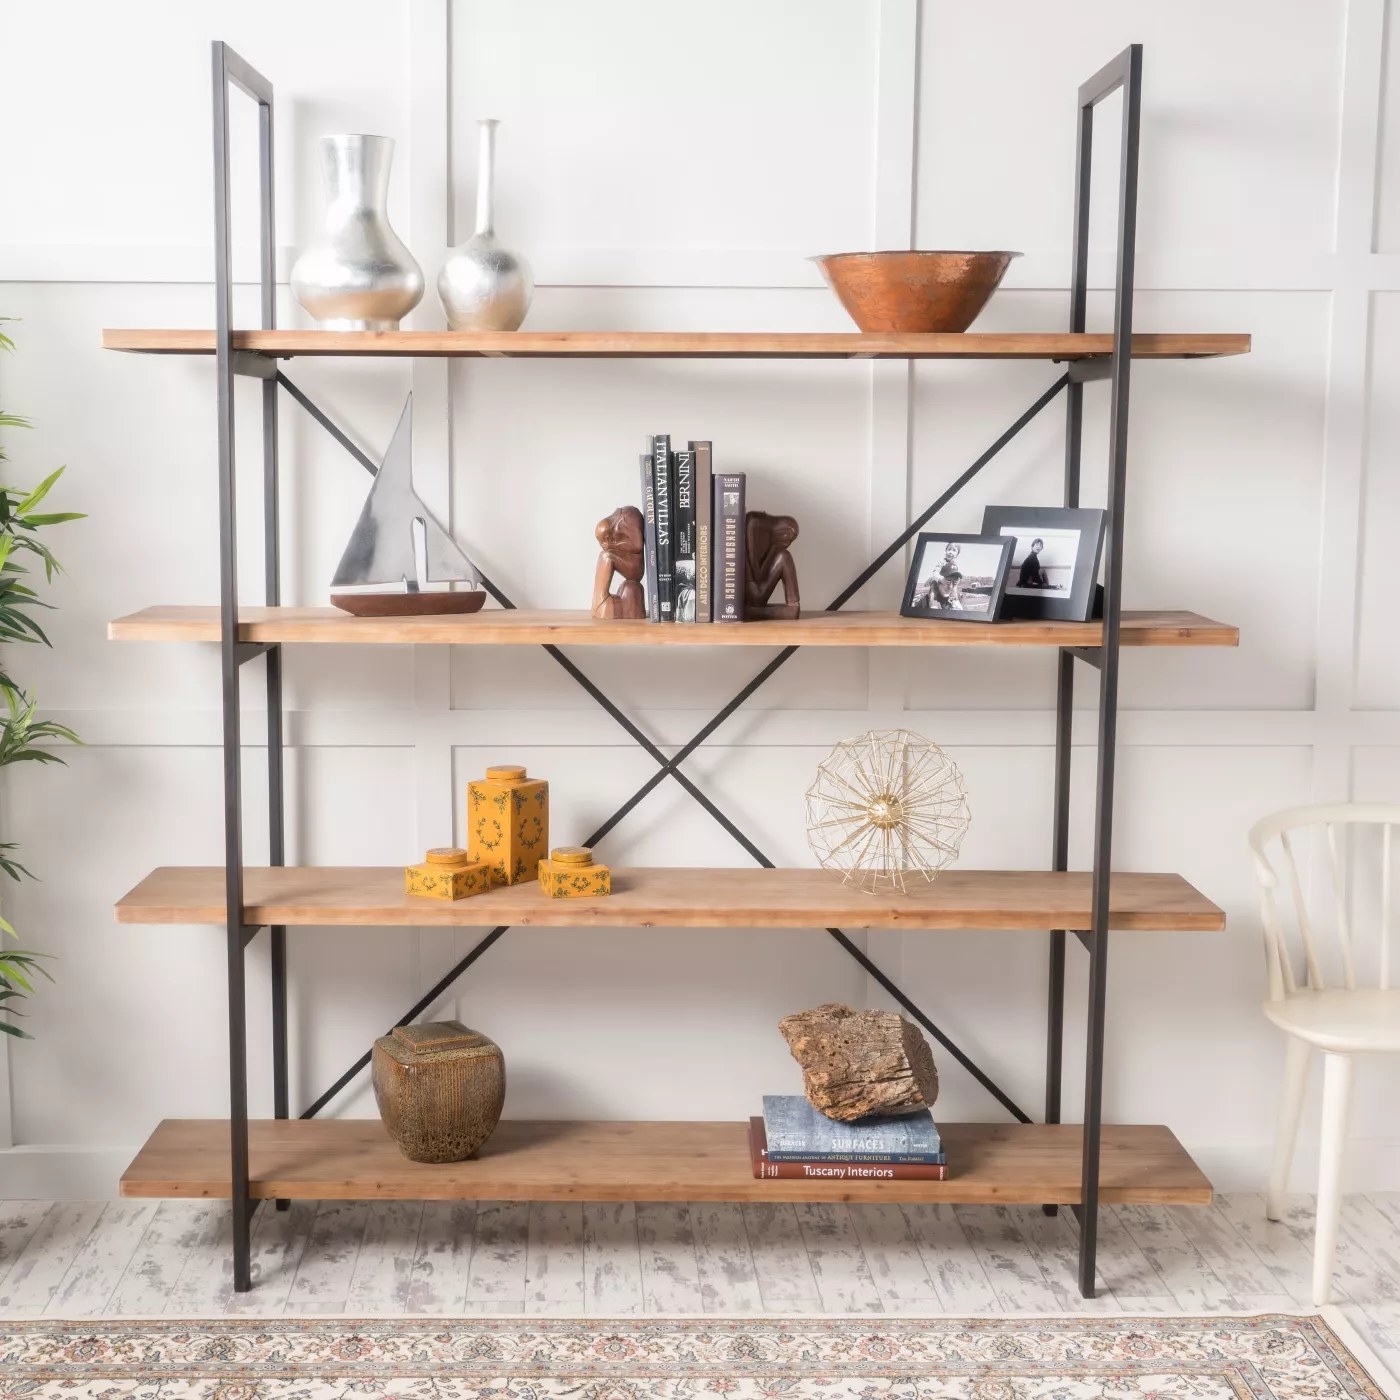 The wood and iron shelving unit